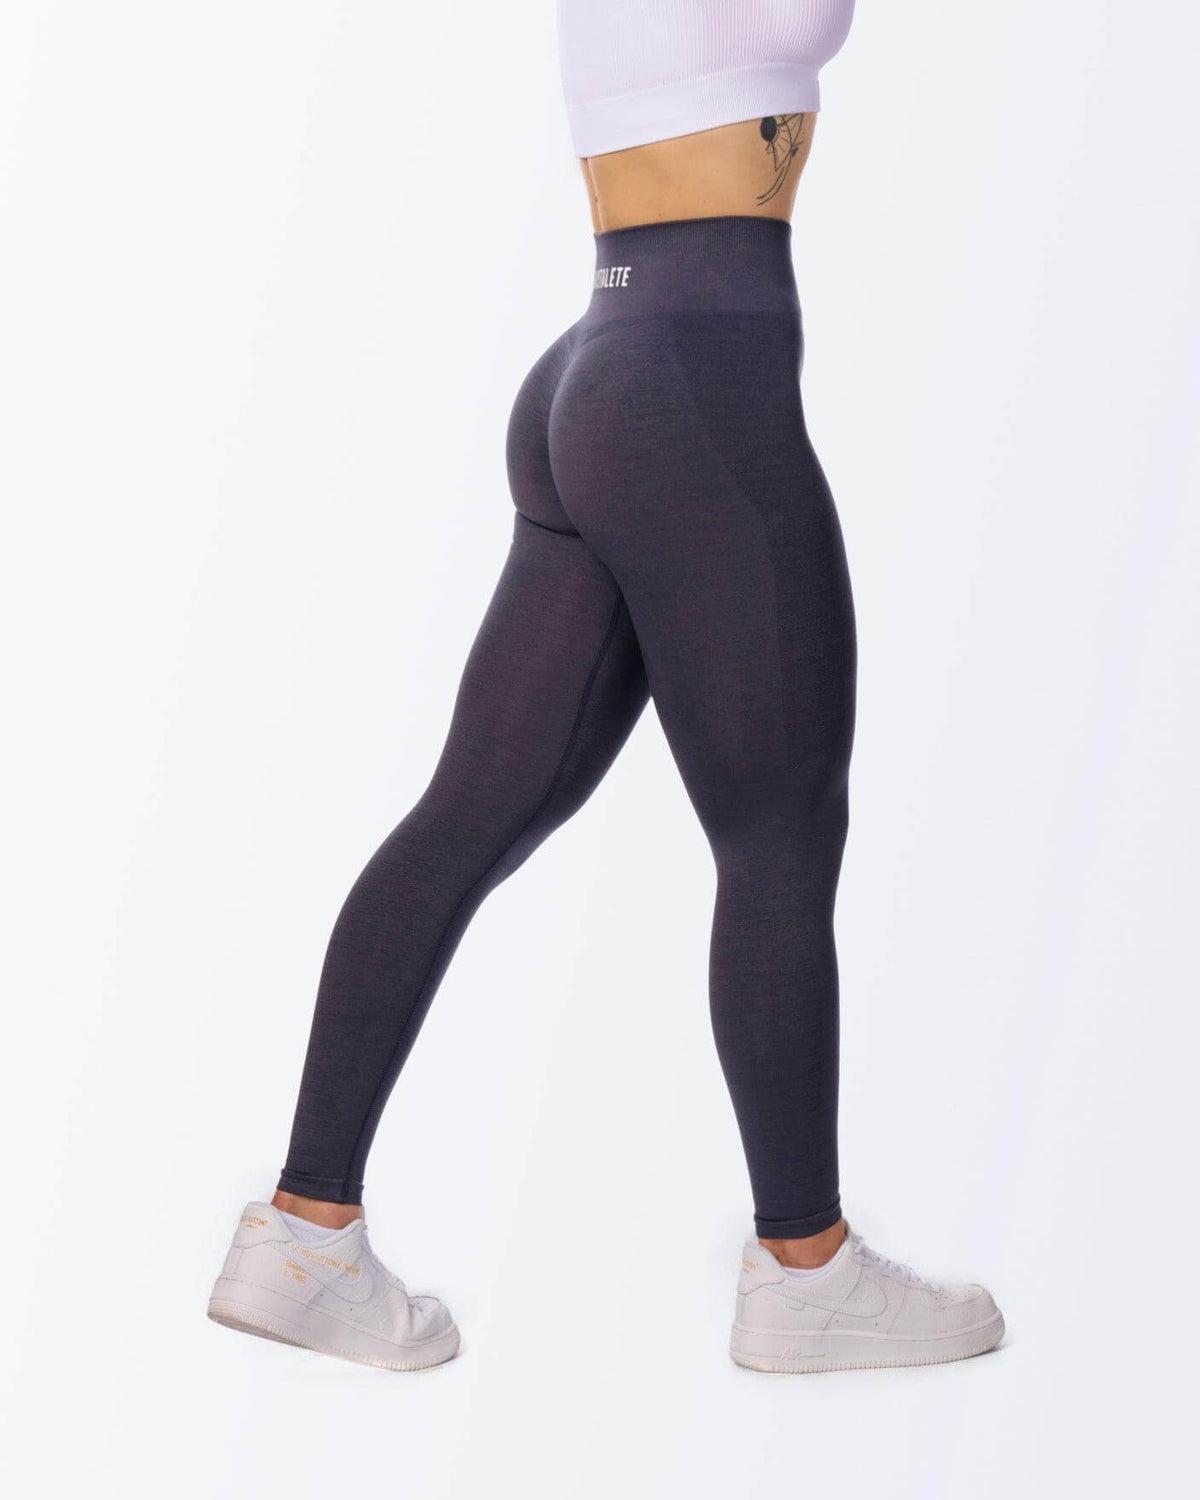 Buy YEOREO Scrunch Butt Lift Leggings for Women Workout Yoga Pants Ruched  Booty High Waist Seamless Leggings Compression Tights, #1 Black, X-Small at